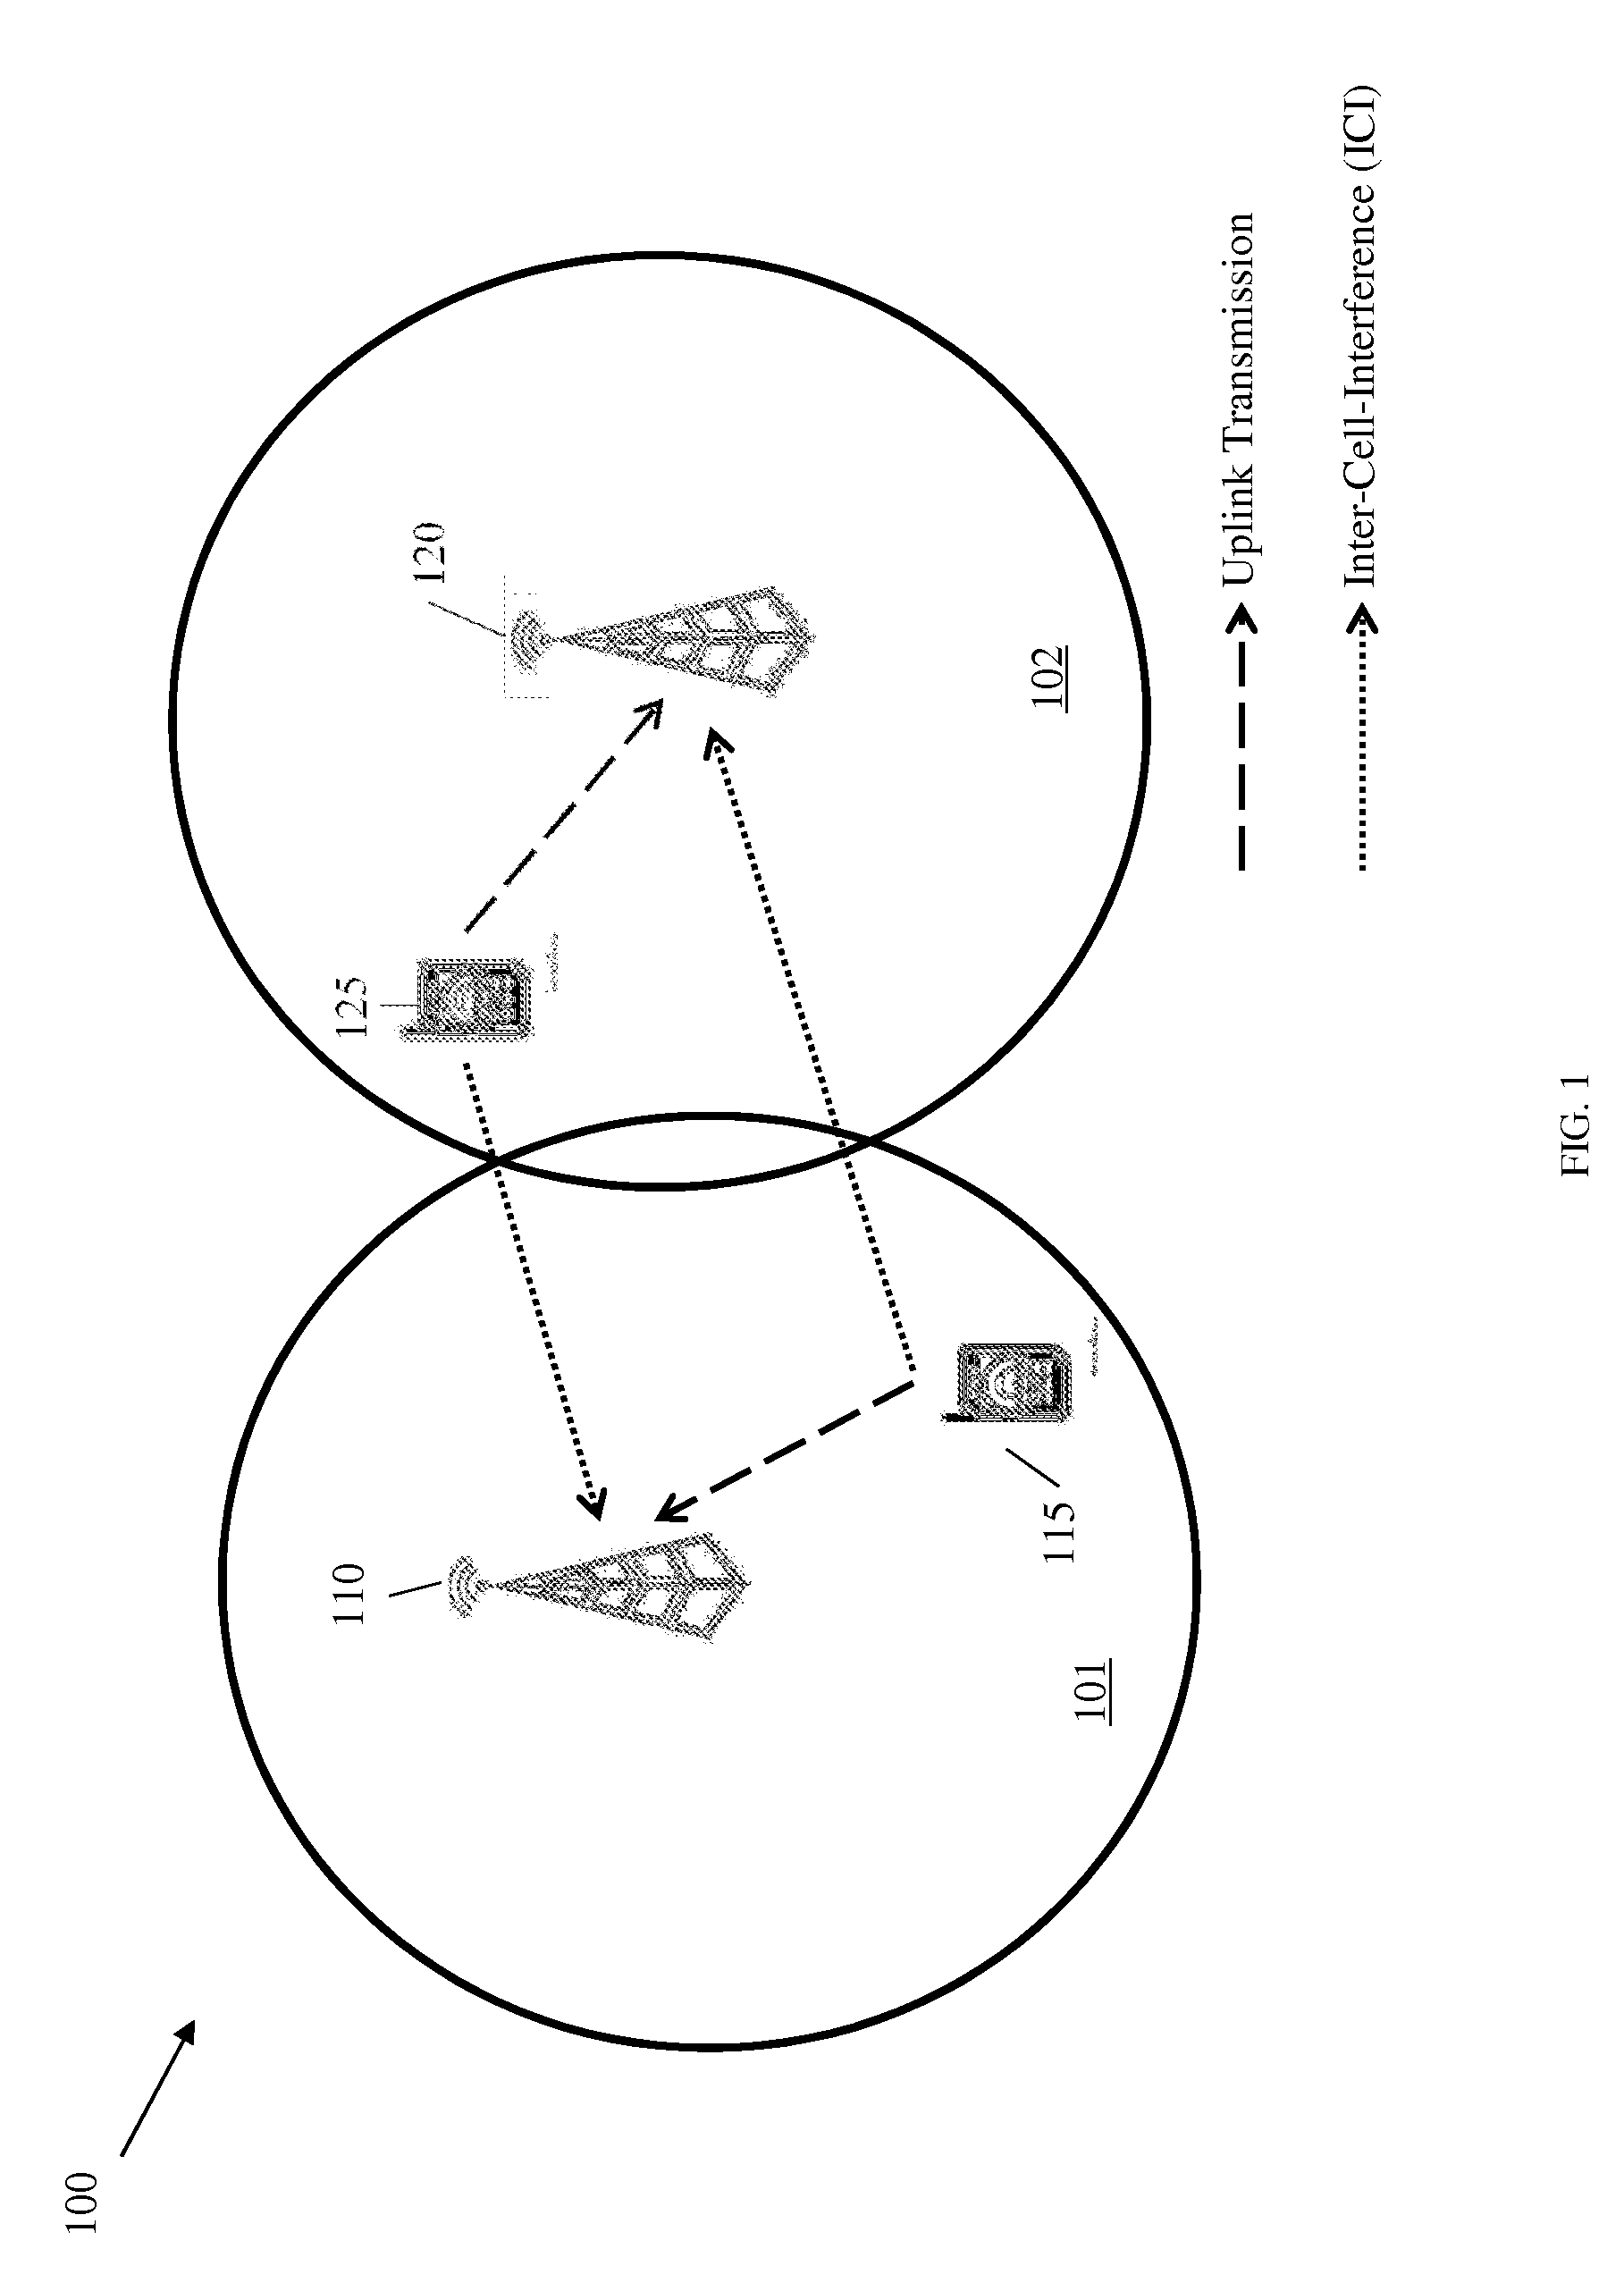 Systems and methods for uplink power control and scheduling in a wireless network